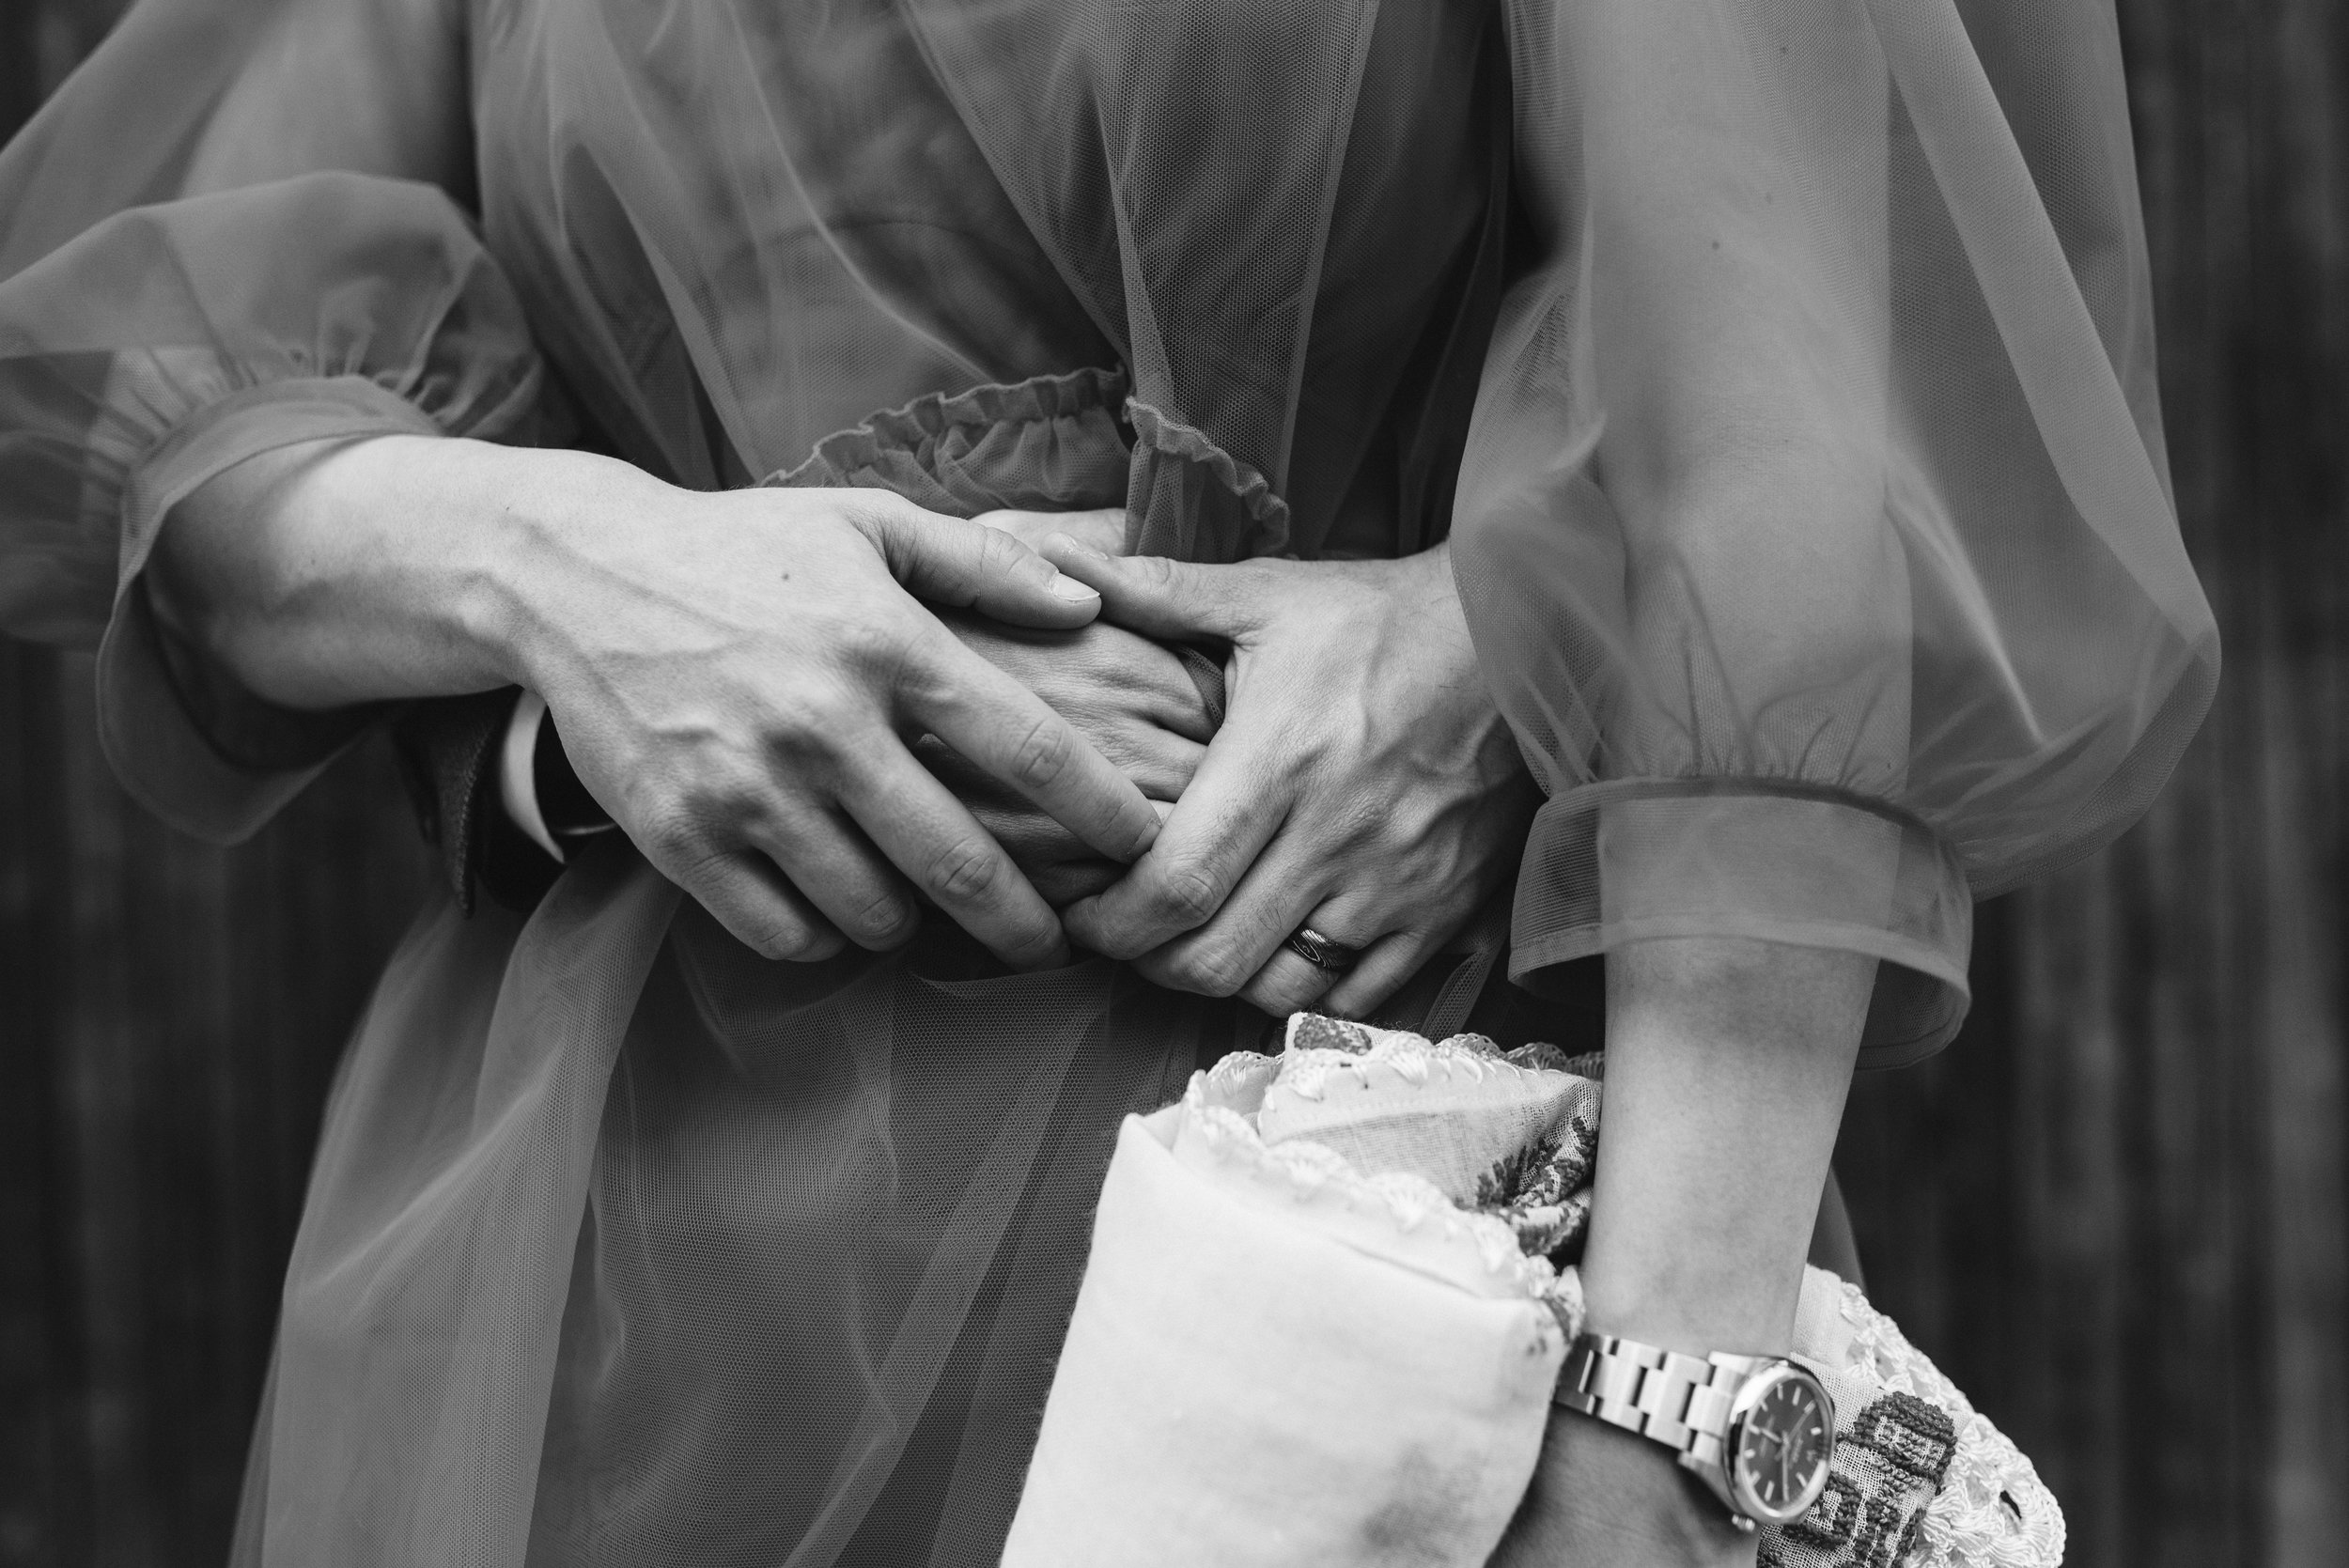  Washington DC, Baltimore Wedding Photographer, Intimate Wedding, Traditional, Classic, Palestinian, Closeup of Bride and Groom Holding Hands, Black and White Photo 